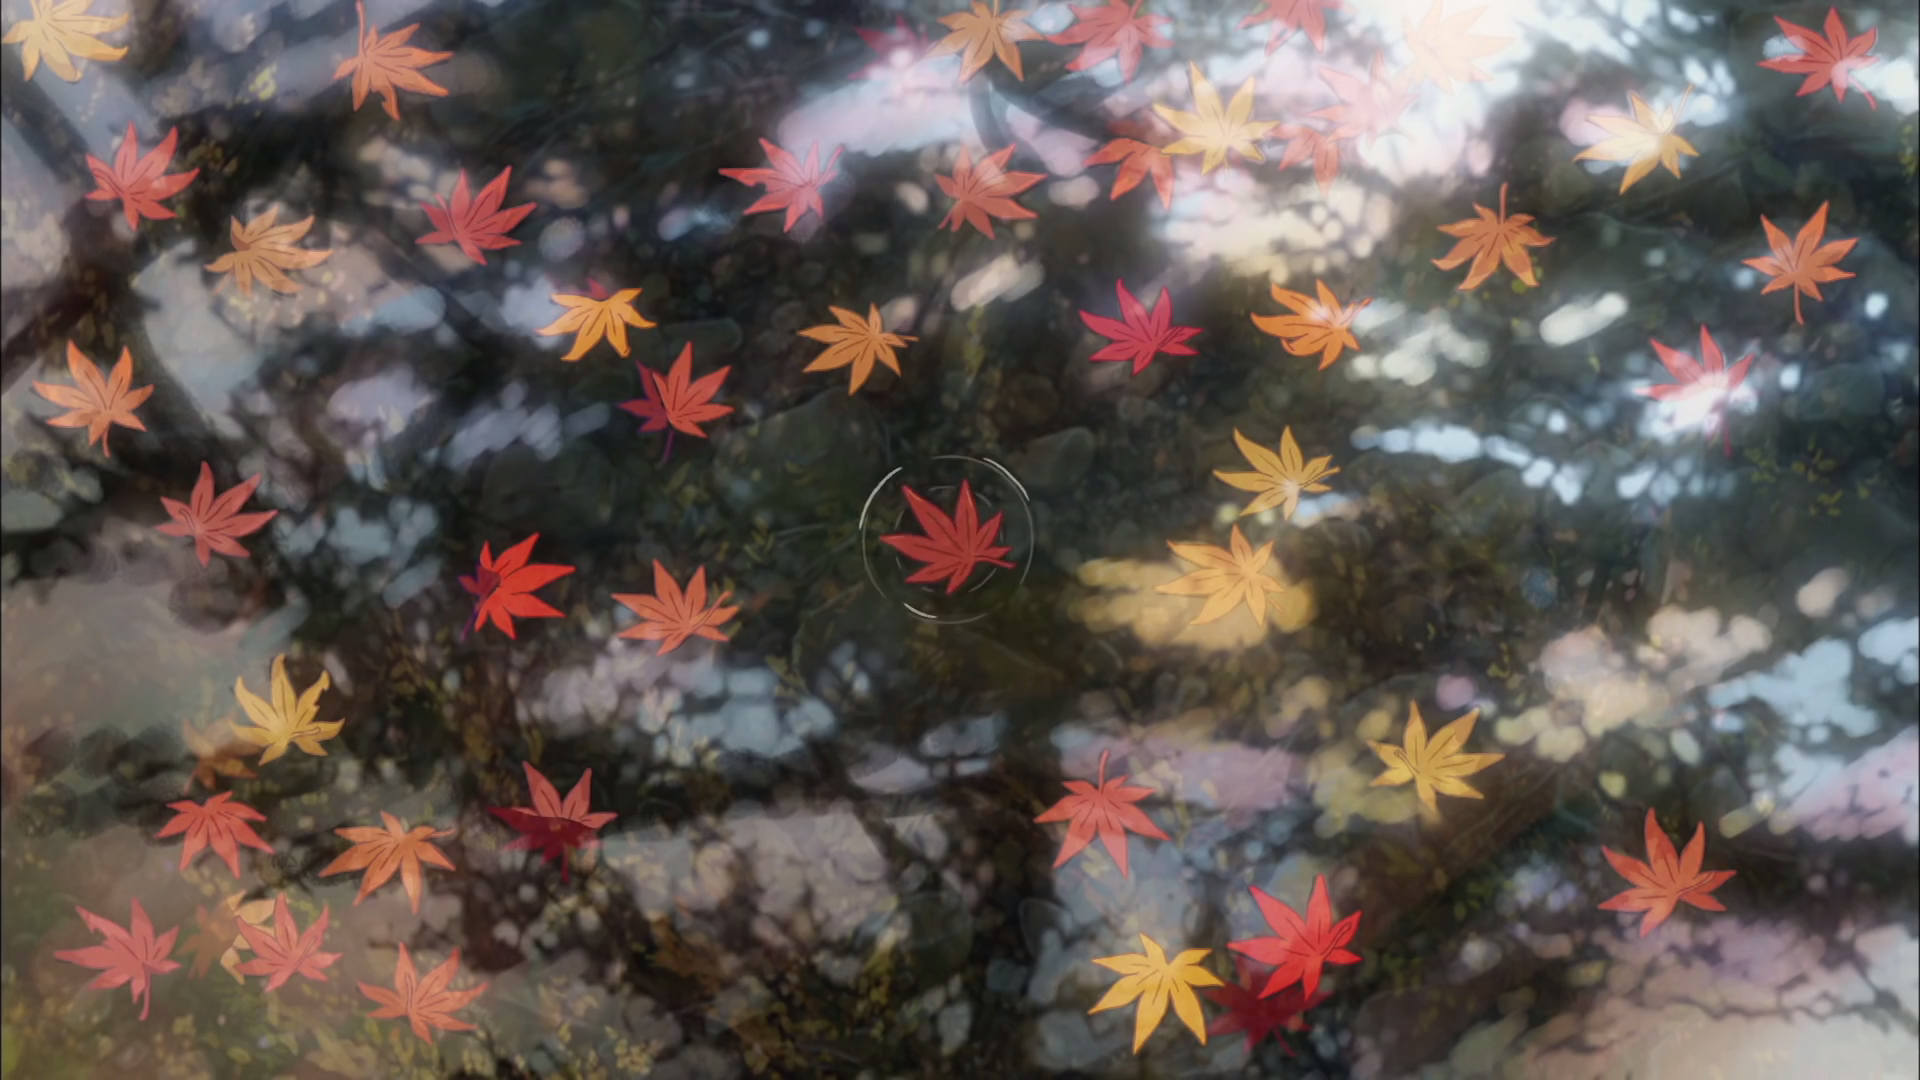 Leaves in water - From "Your Name." (君の名は。)